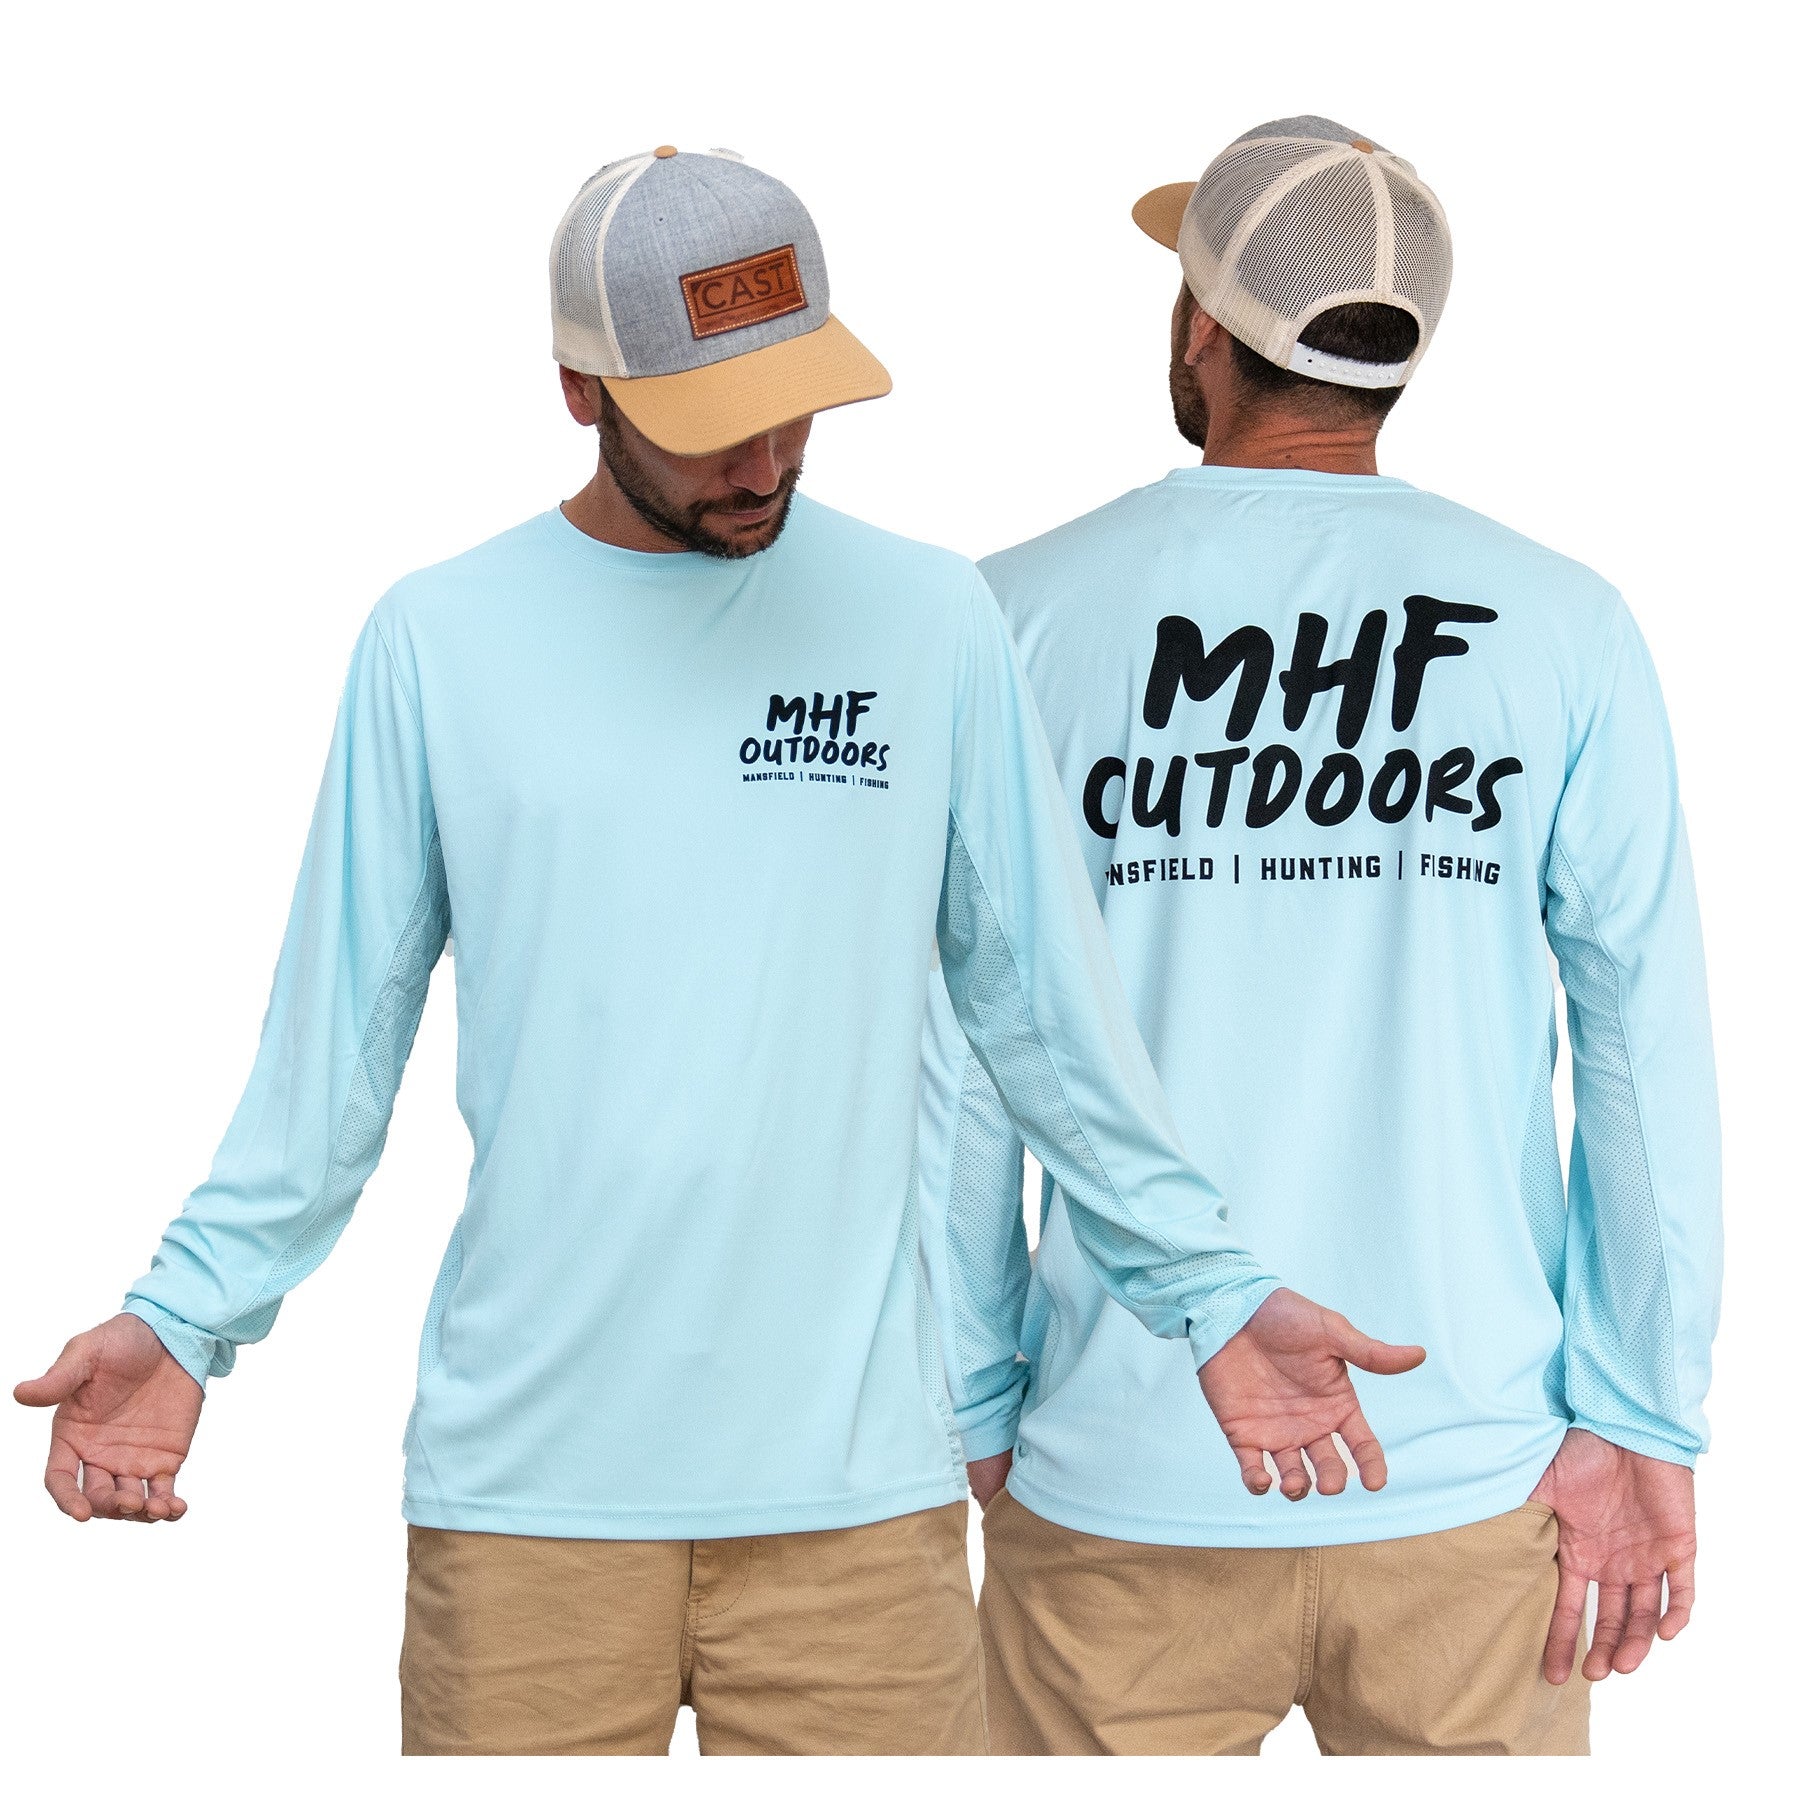 MHF x Cast Revive UPF50+ Lightweight Performance Fishing Jersey - S / AQUA - Mansfield Hunting & Fishing - Products to prepare for Corona Virus